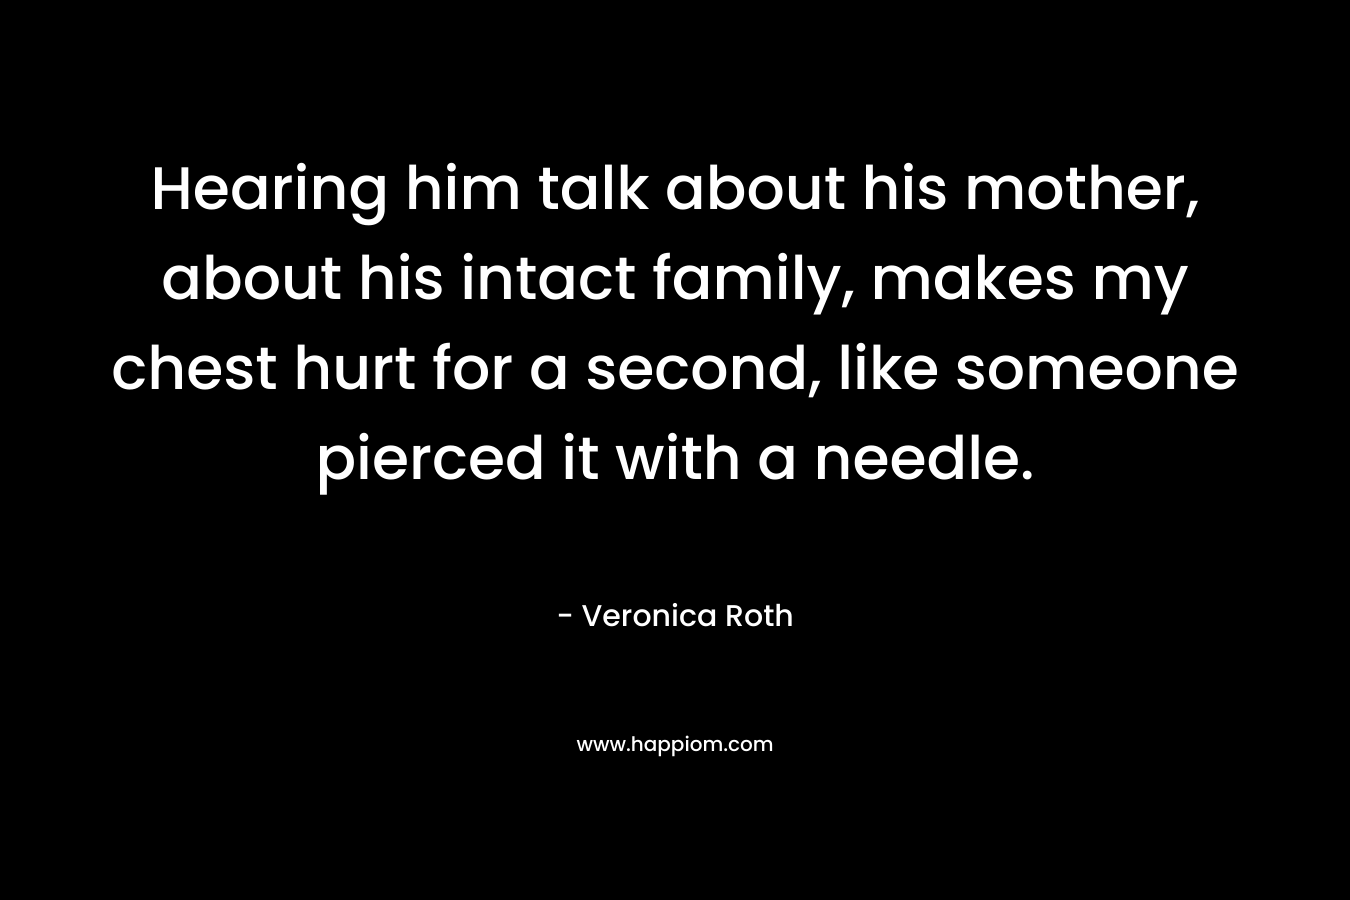 Hearing him talk about his mother, about his intact family, makes my chest hurt for a second, like someone pierced it with a needle. – Veronica Roth